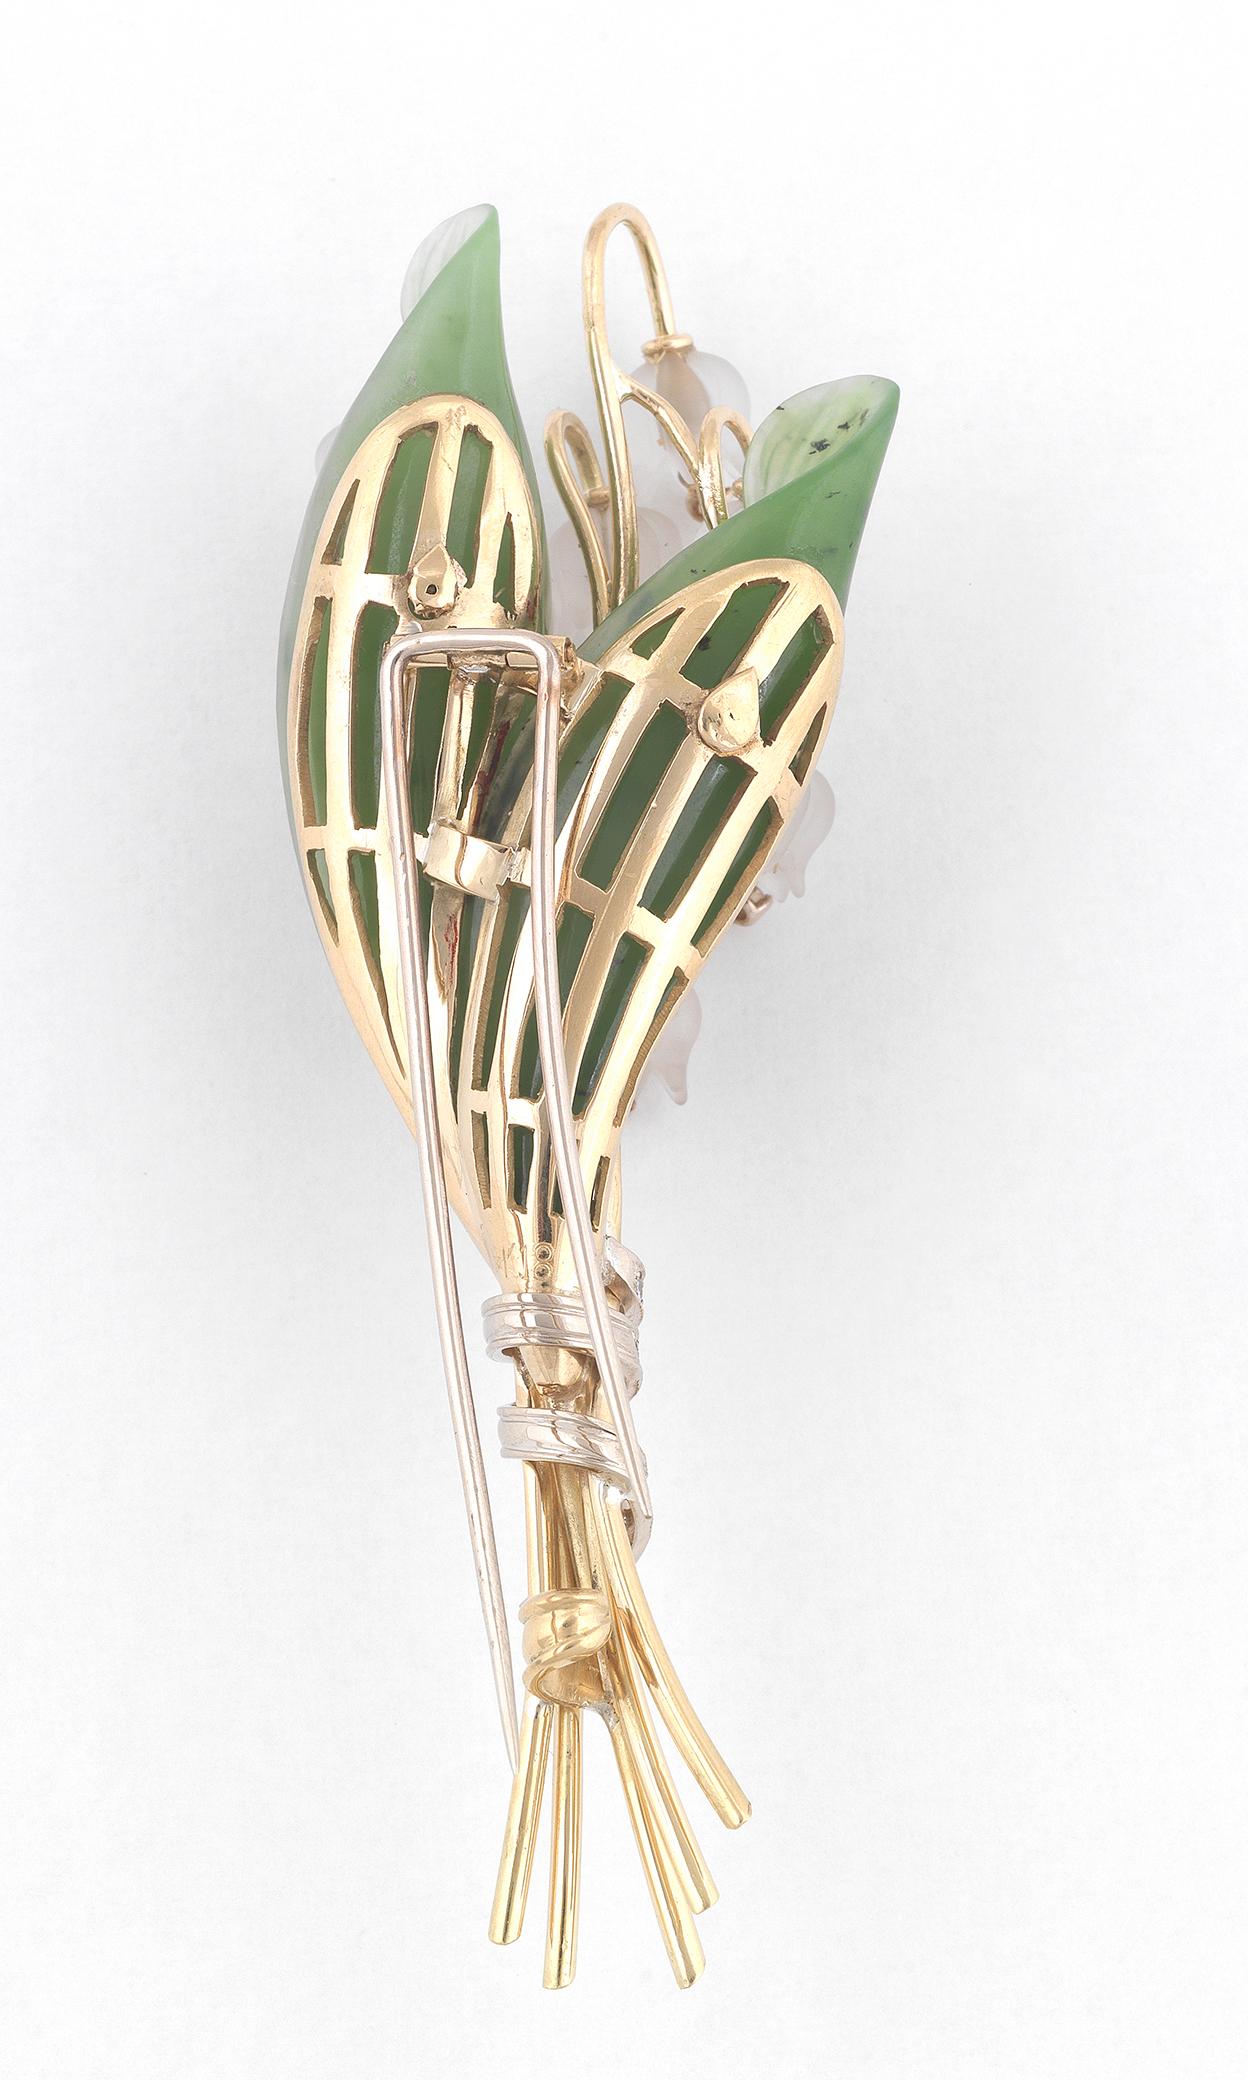 The brooch realistically modeled as a stalk of lily of the valley, set with carved moonstone flowers each suspending a  diamond, to a couple of carved jade leaves, the stems accented by 3 lines of diamonds.
Mounted in 18Kt gold
Length: 9 cm
Weight: